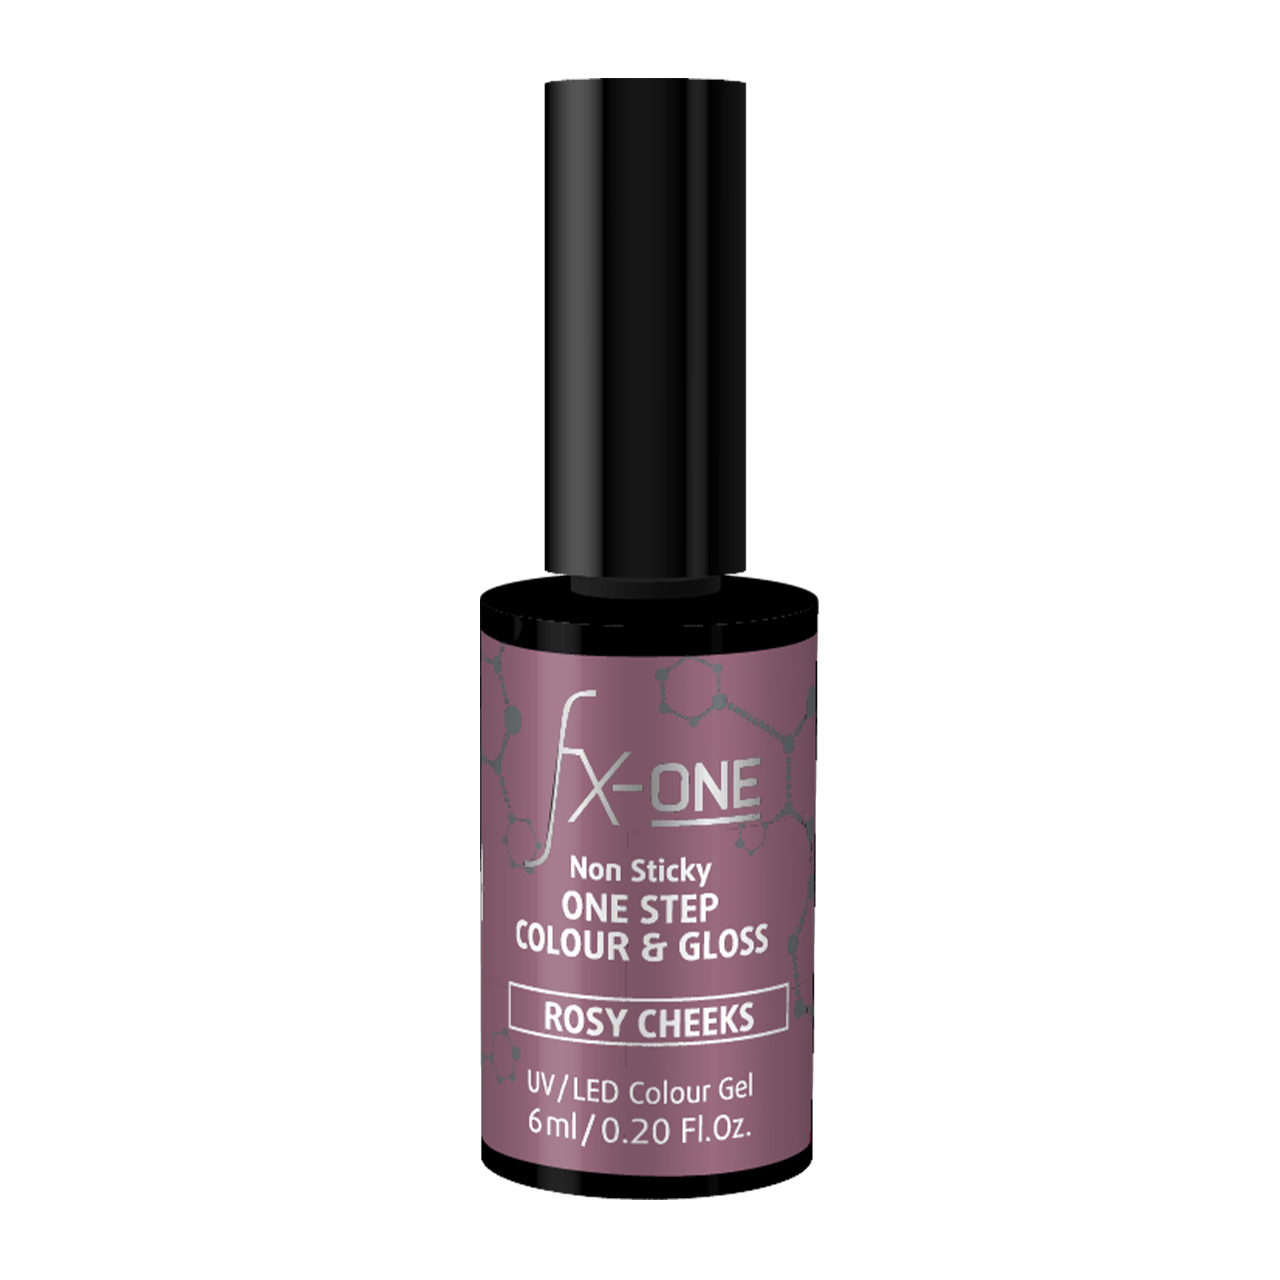 FX-One Colour & Gloss Rosy Cheeks